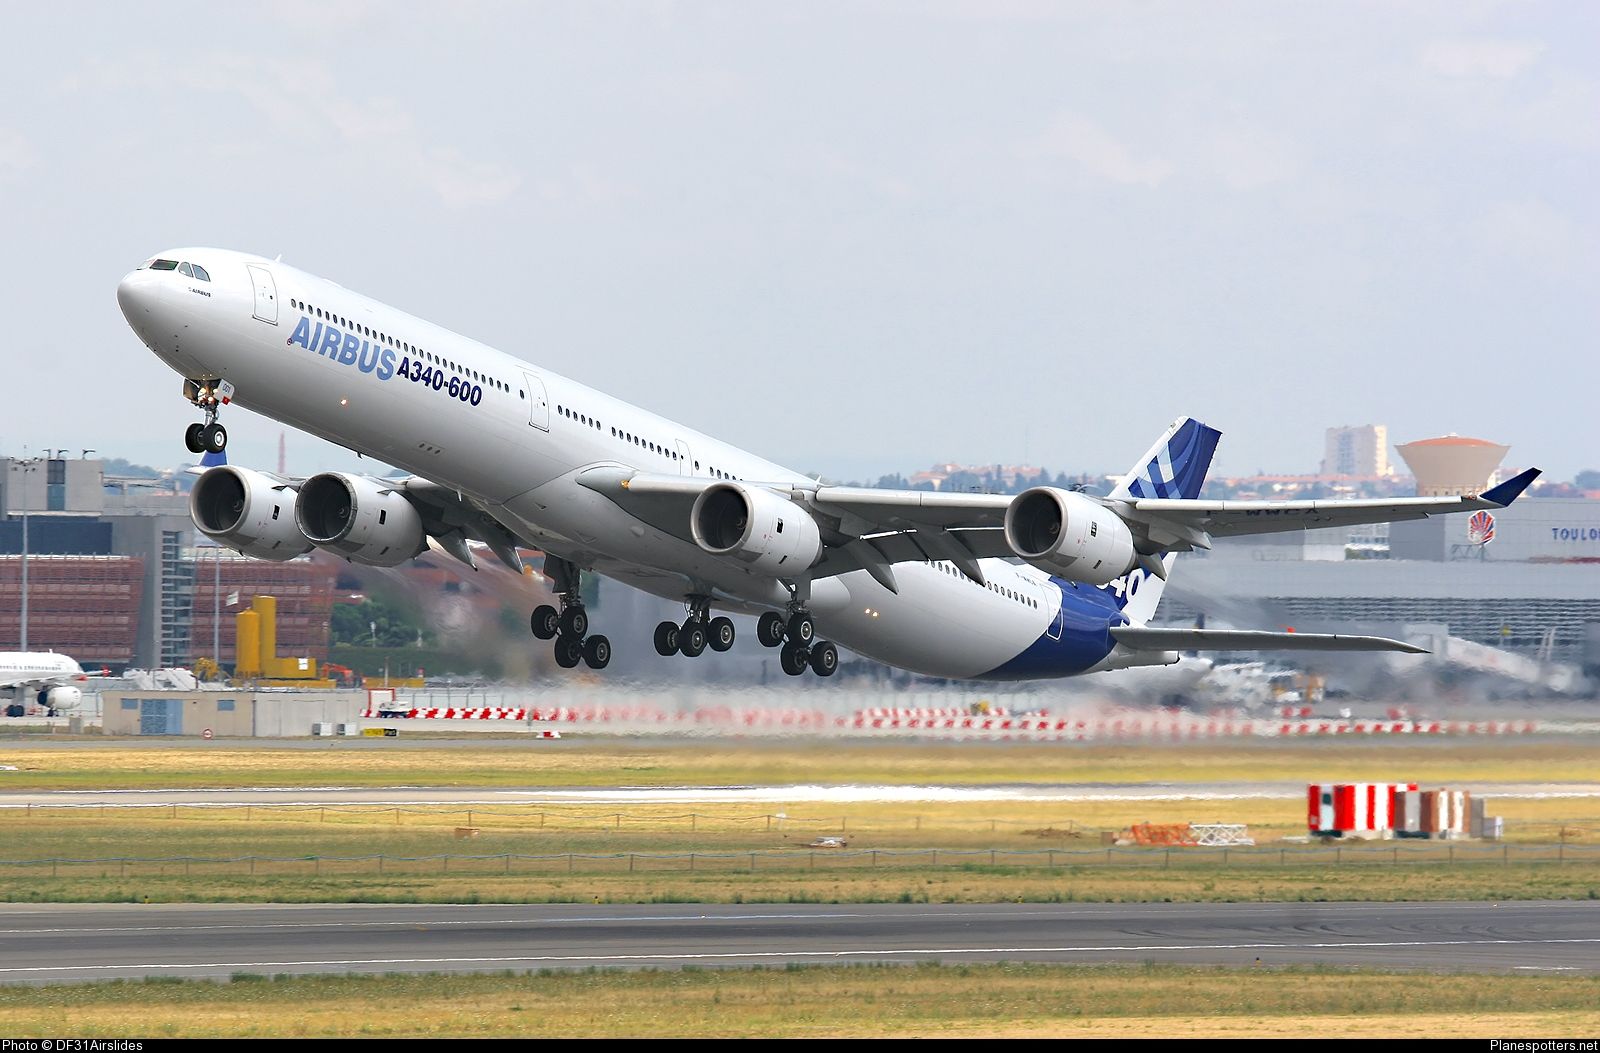 1600x1053px Airbus A340 (768.8 KB).03.2015